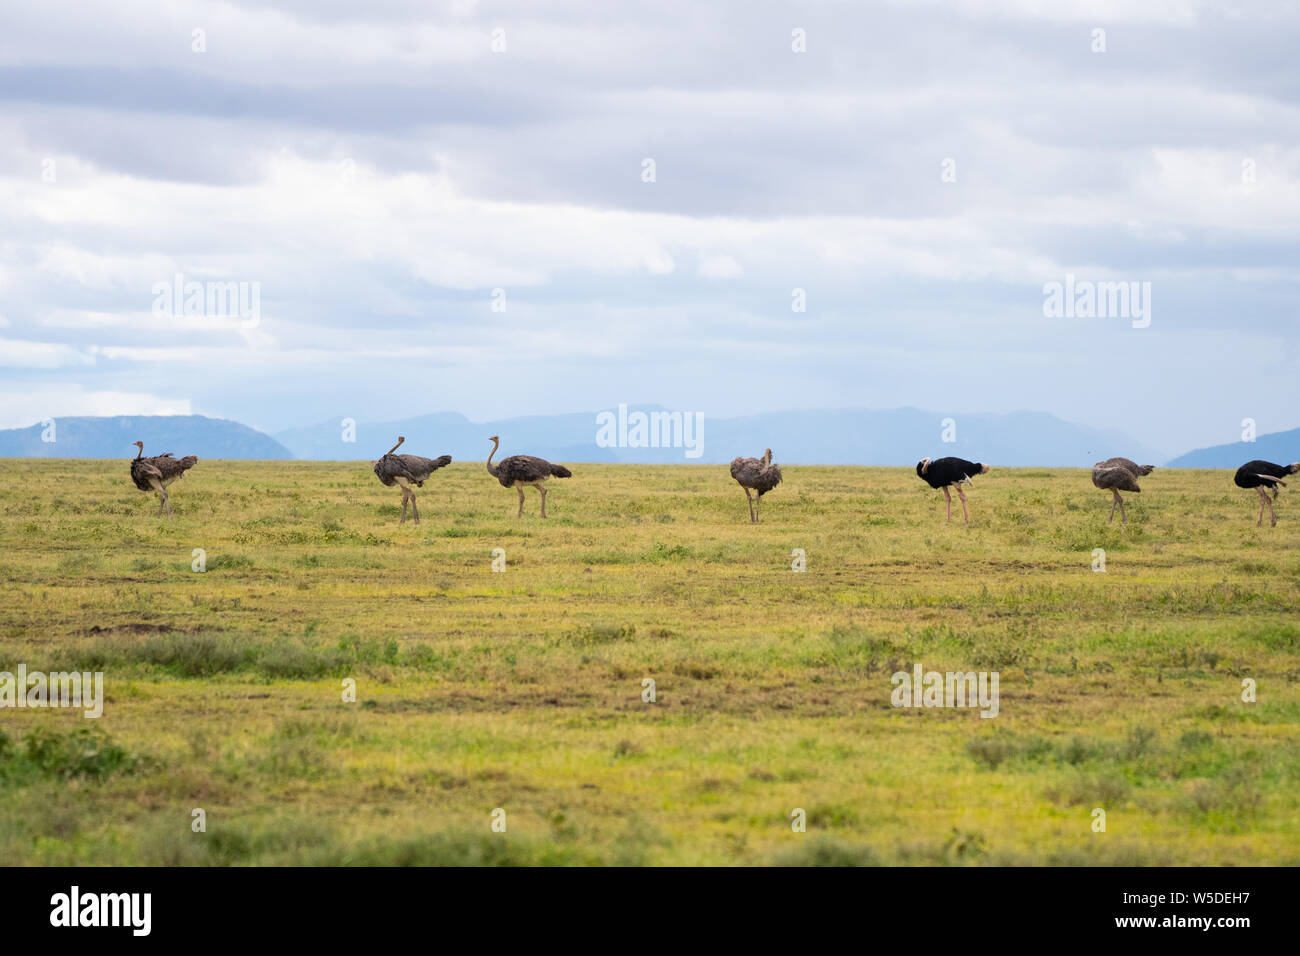 A flock of wild ostriches (Struthio camelus). This group consists of females and a male. The ostrich, a flightless bird, is the world's largest and ta Stock Photo